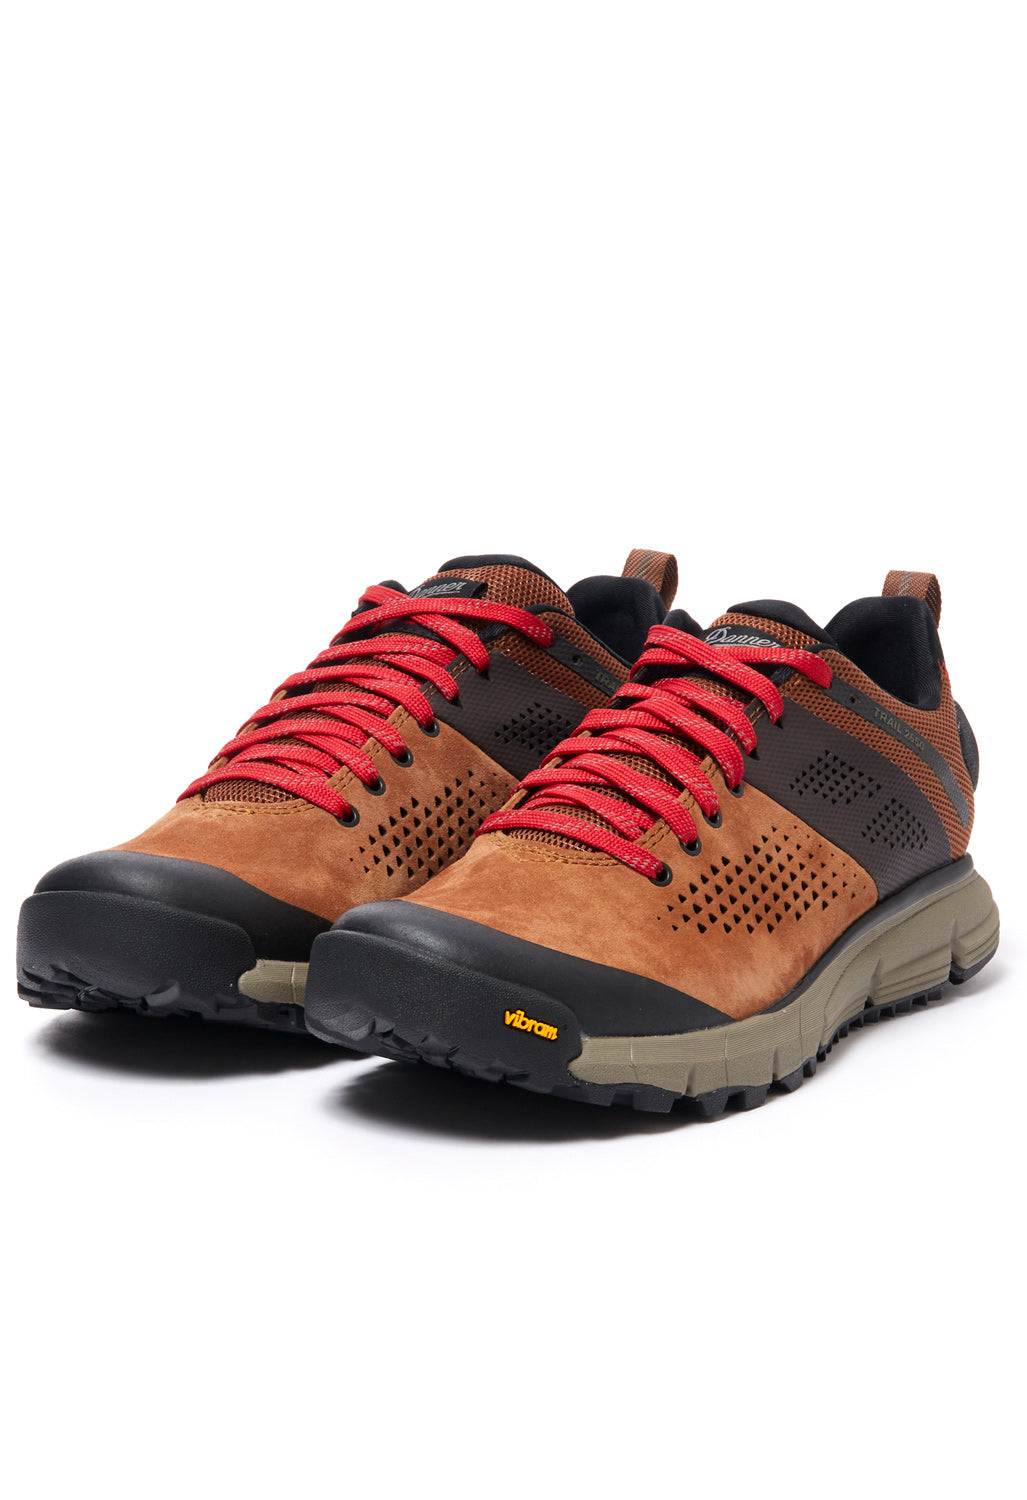 Danner Trail 2650 Men's Trainers - Brown/Red